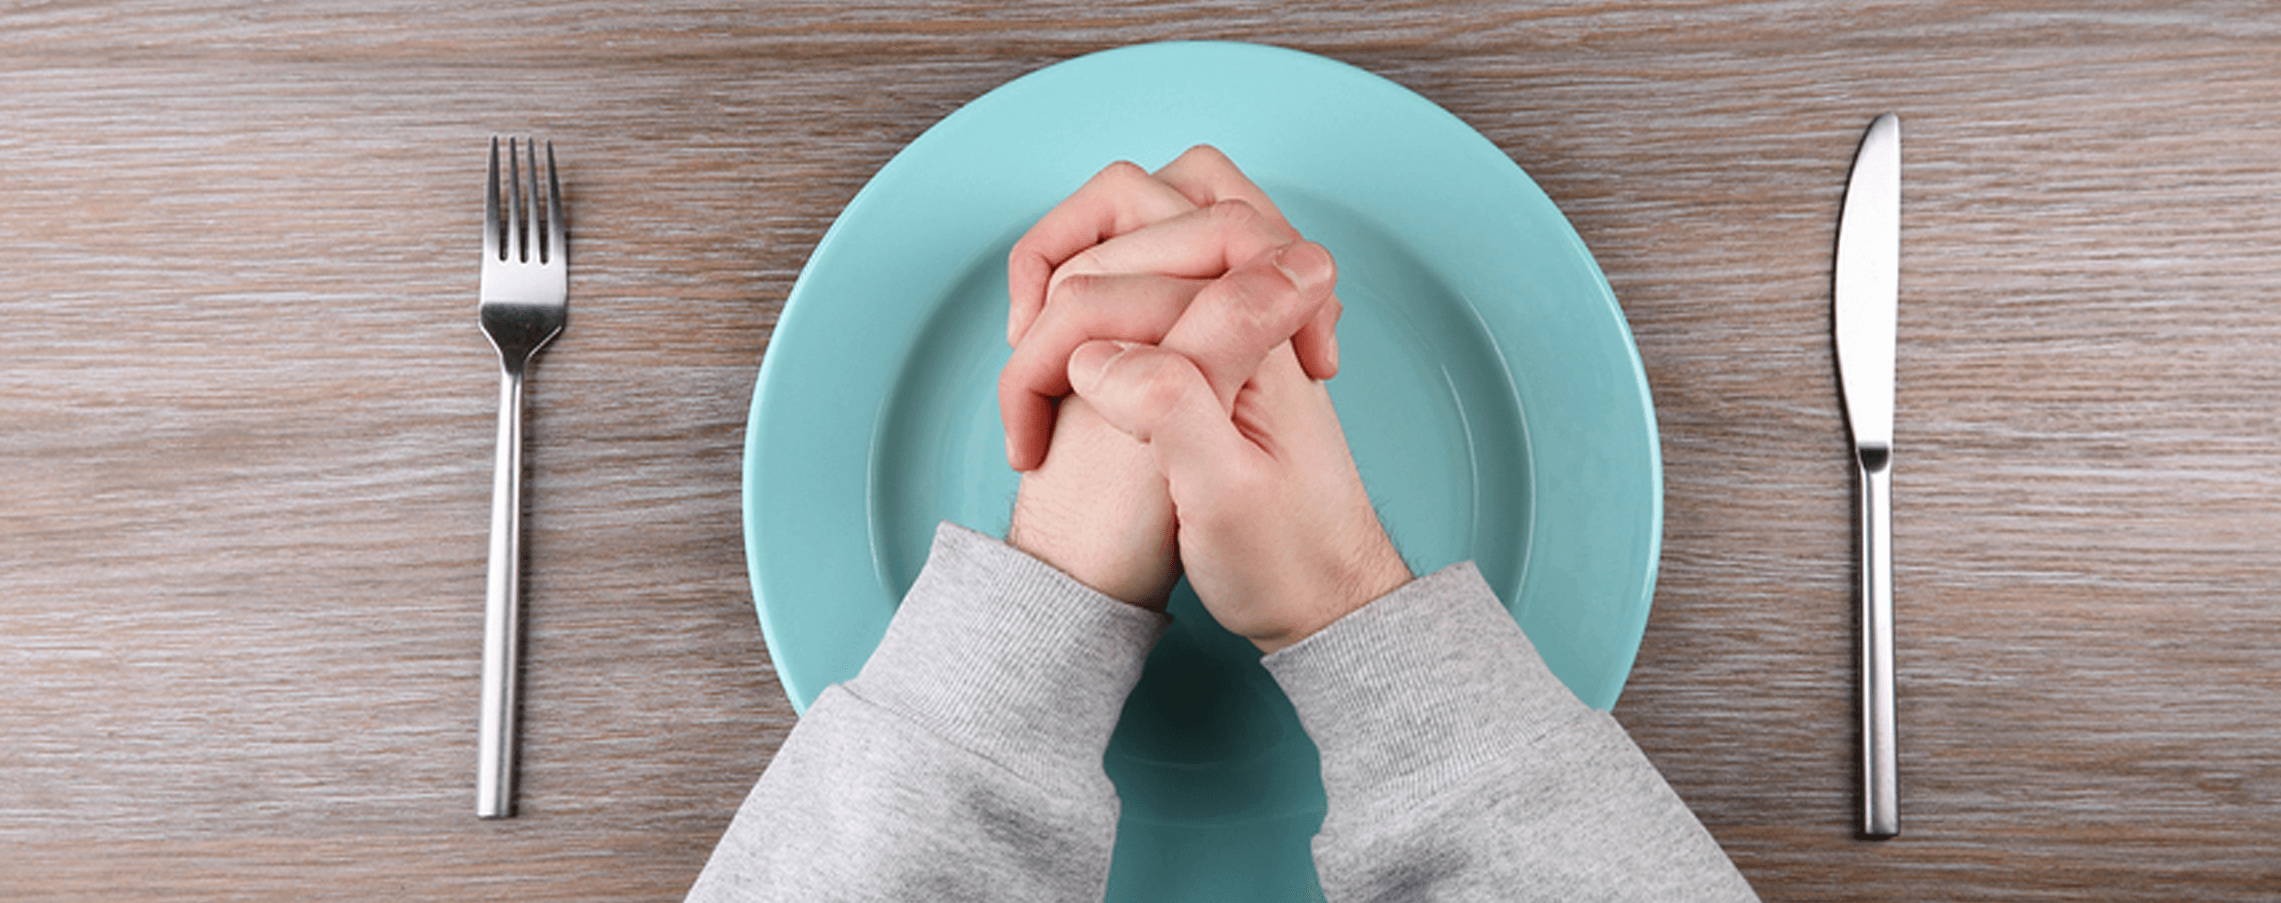 Boy clasping hands over empty plate